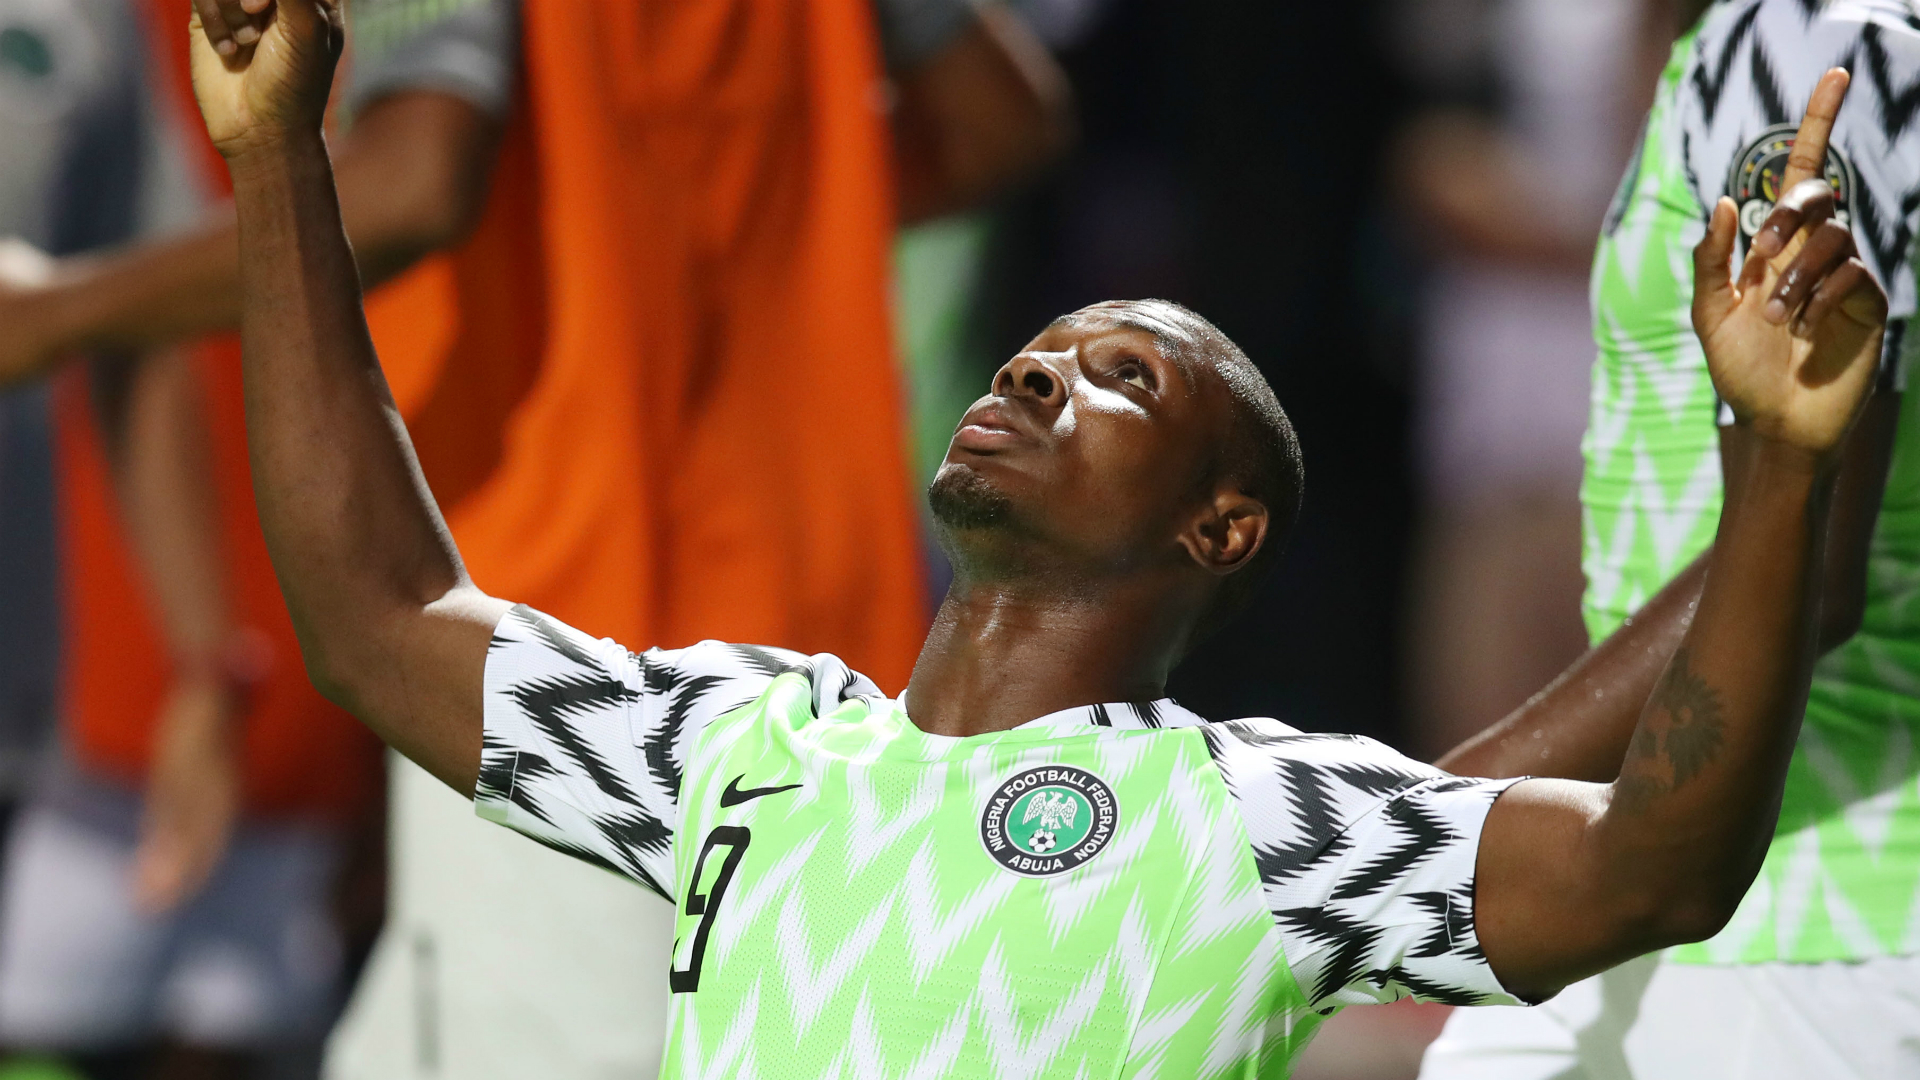 Afcon 2019: Ighalo will start against Guinea, Gernot Rohr confirms